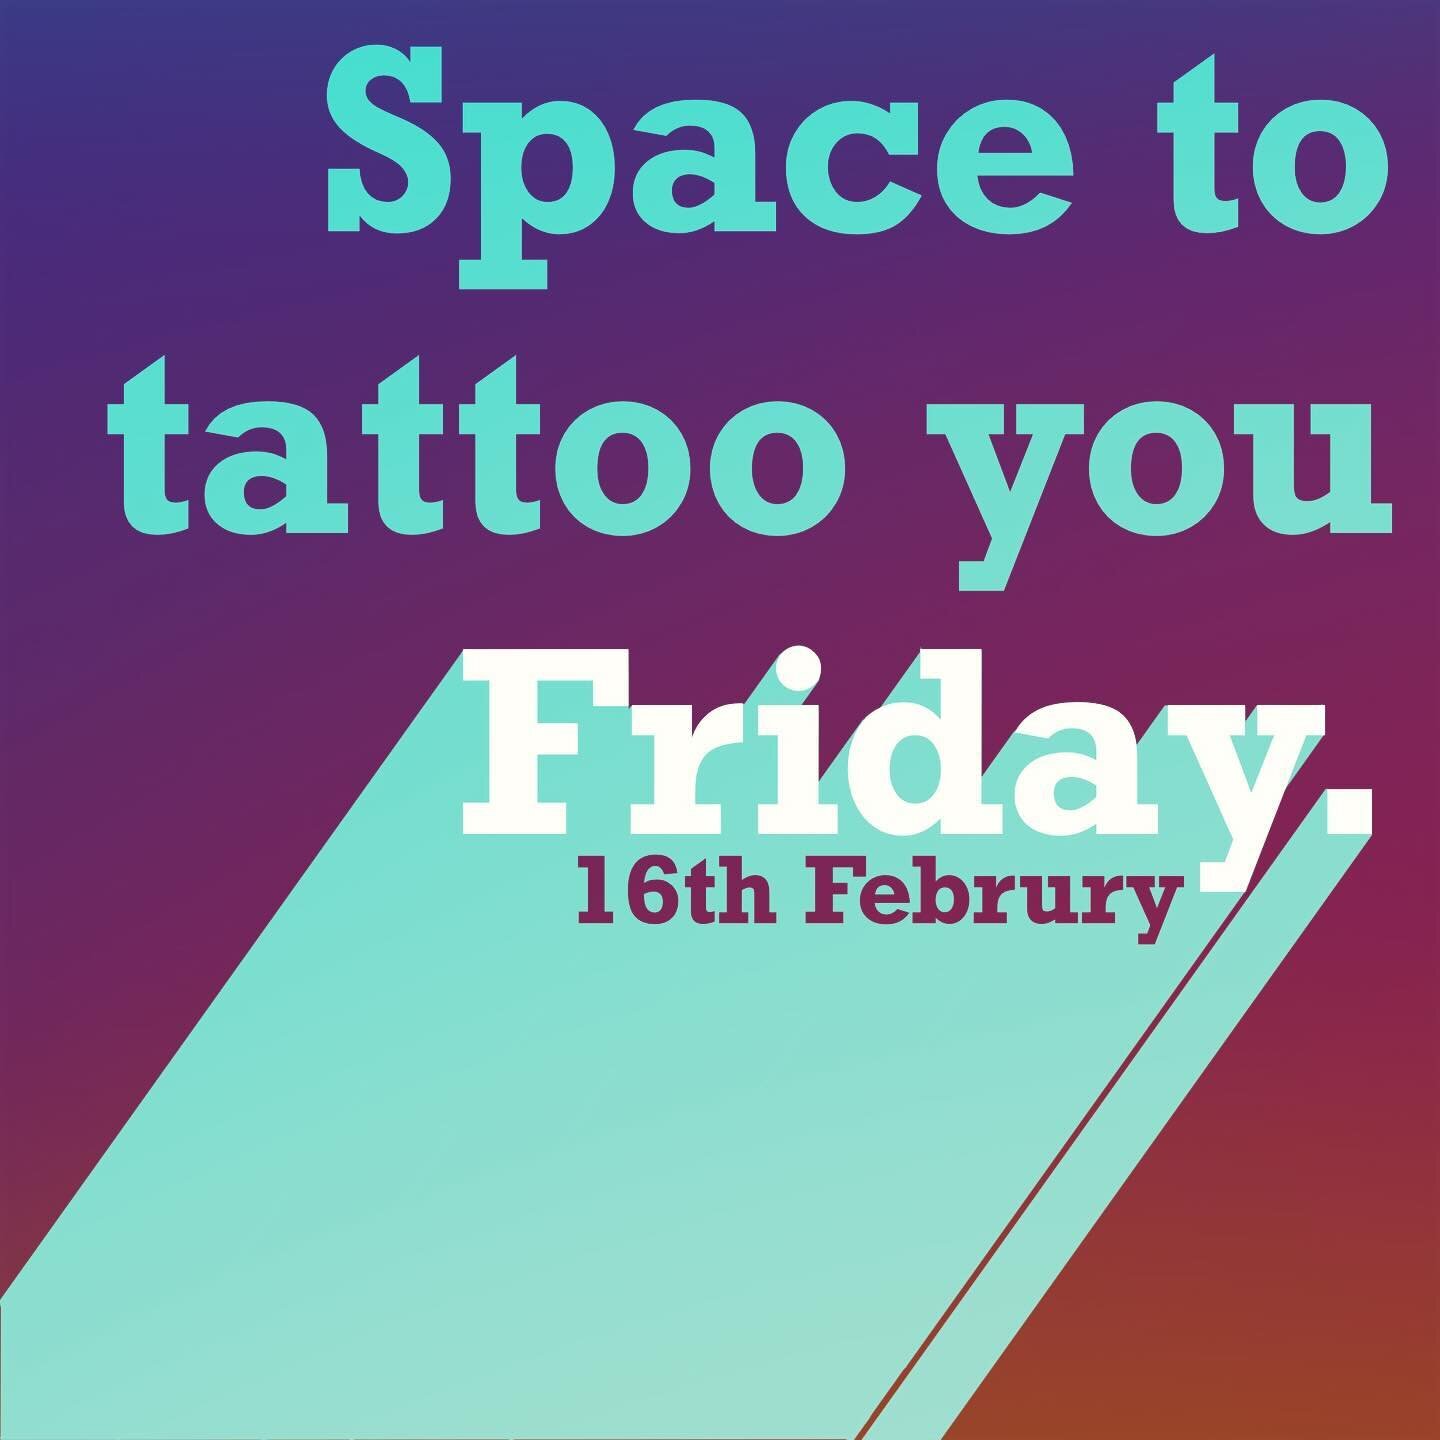 Yep space to tattoo THIS FRIDAY! 

cassytattoo@gmail.com / DM if you wanted in, or if you wanted to find out how to spread the cost of your next tattoo 😎

#tattoo #tattooappointment #tattooappointmentbournemouth #bournemouth #bournemouthtattoo #bour